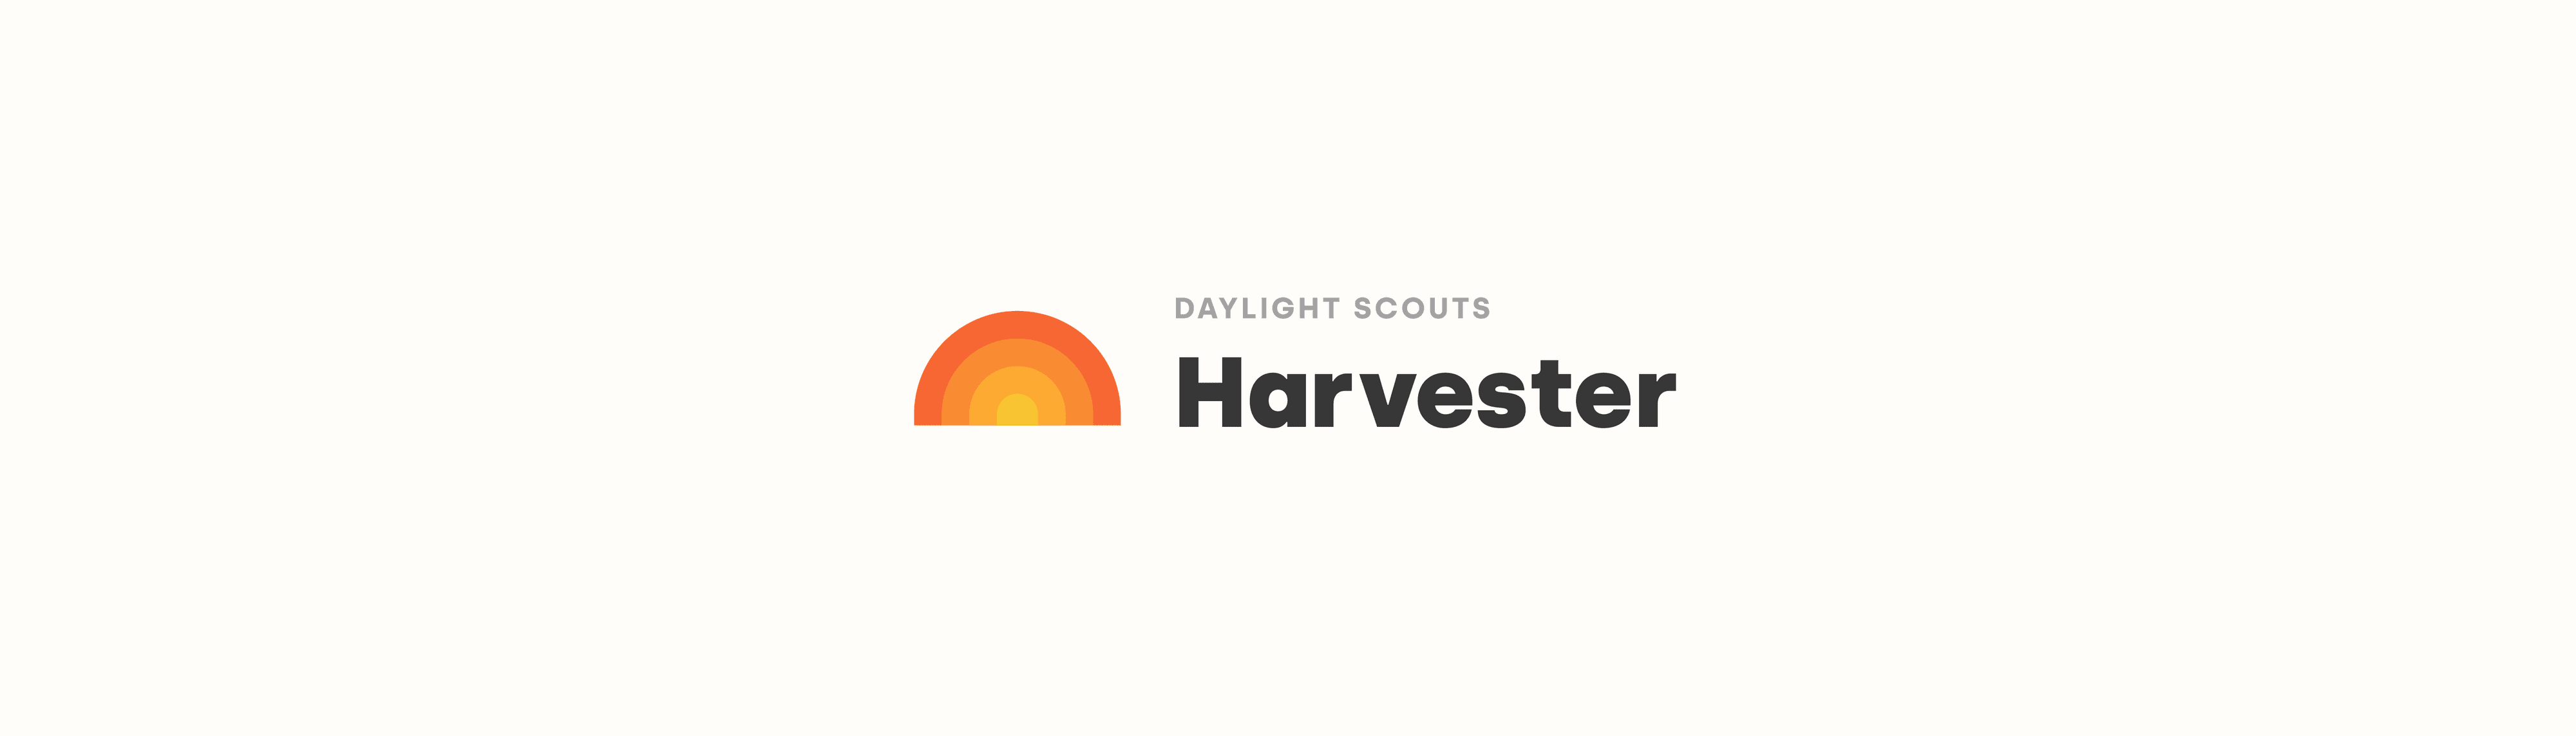 Daylight Scouts: Harvesters